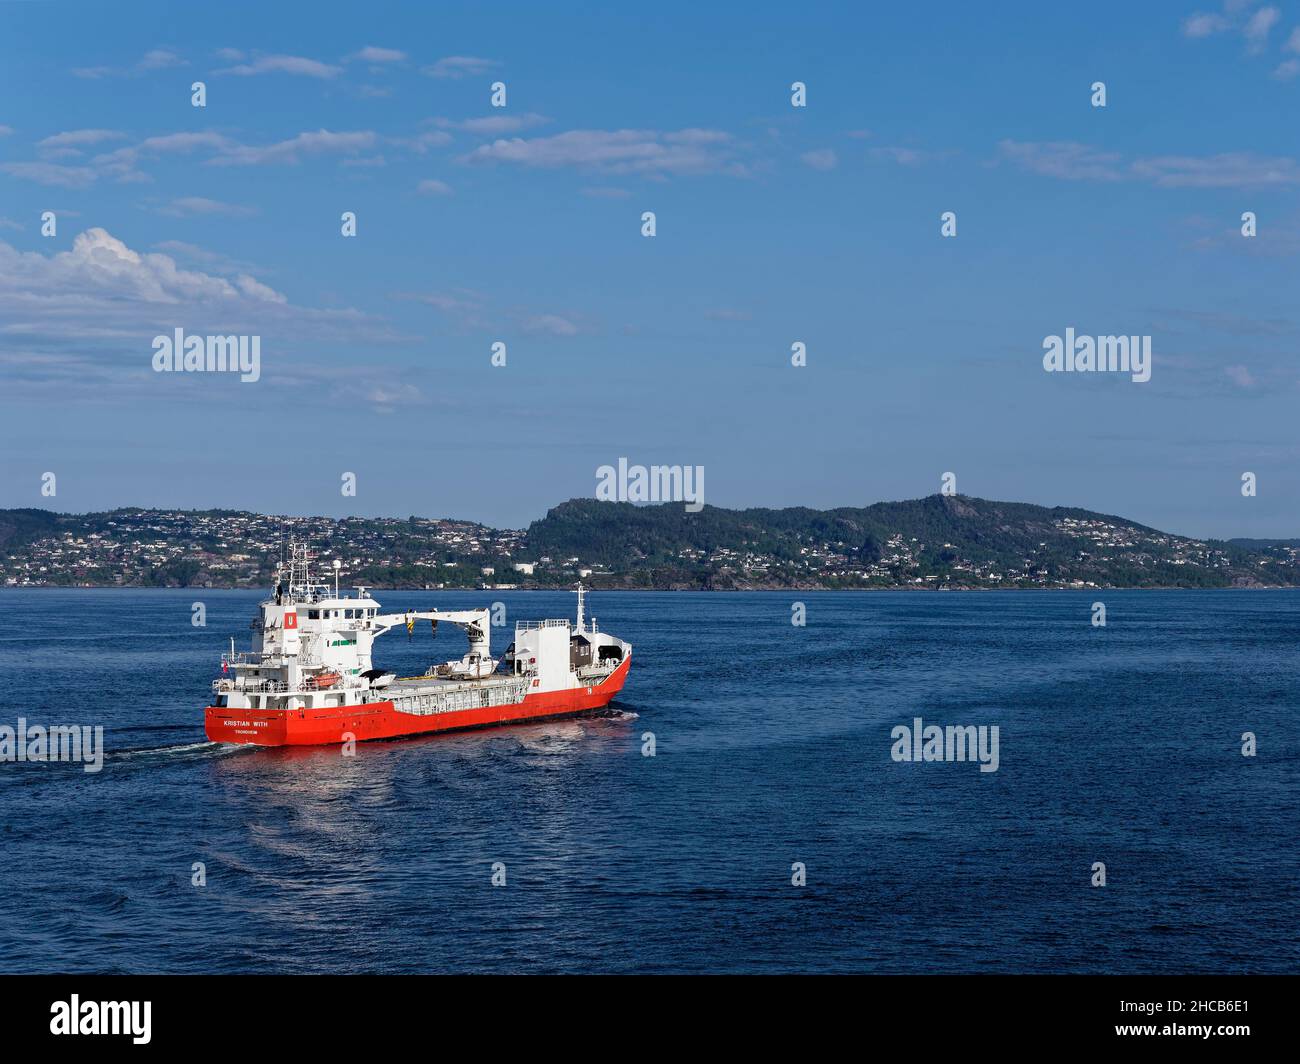 The Kristian With, a General Cargo Vessel in Bergen Fjord heading out to the North Sea in calm water with surface currents visible. Stock Photo